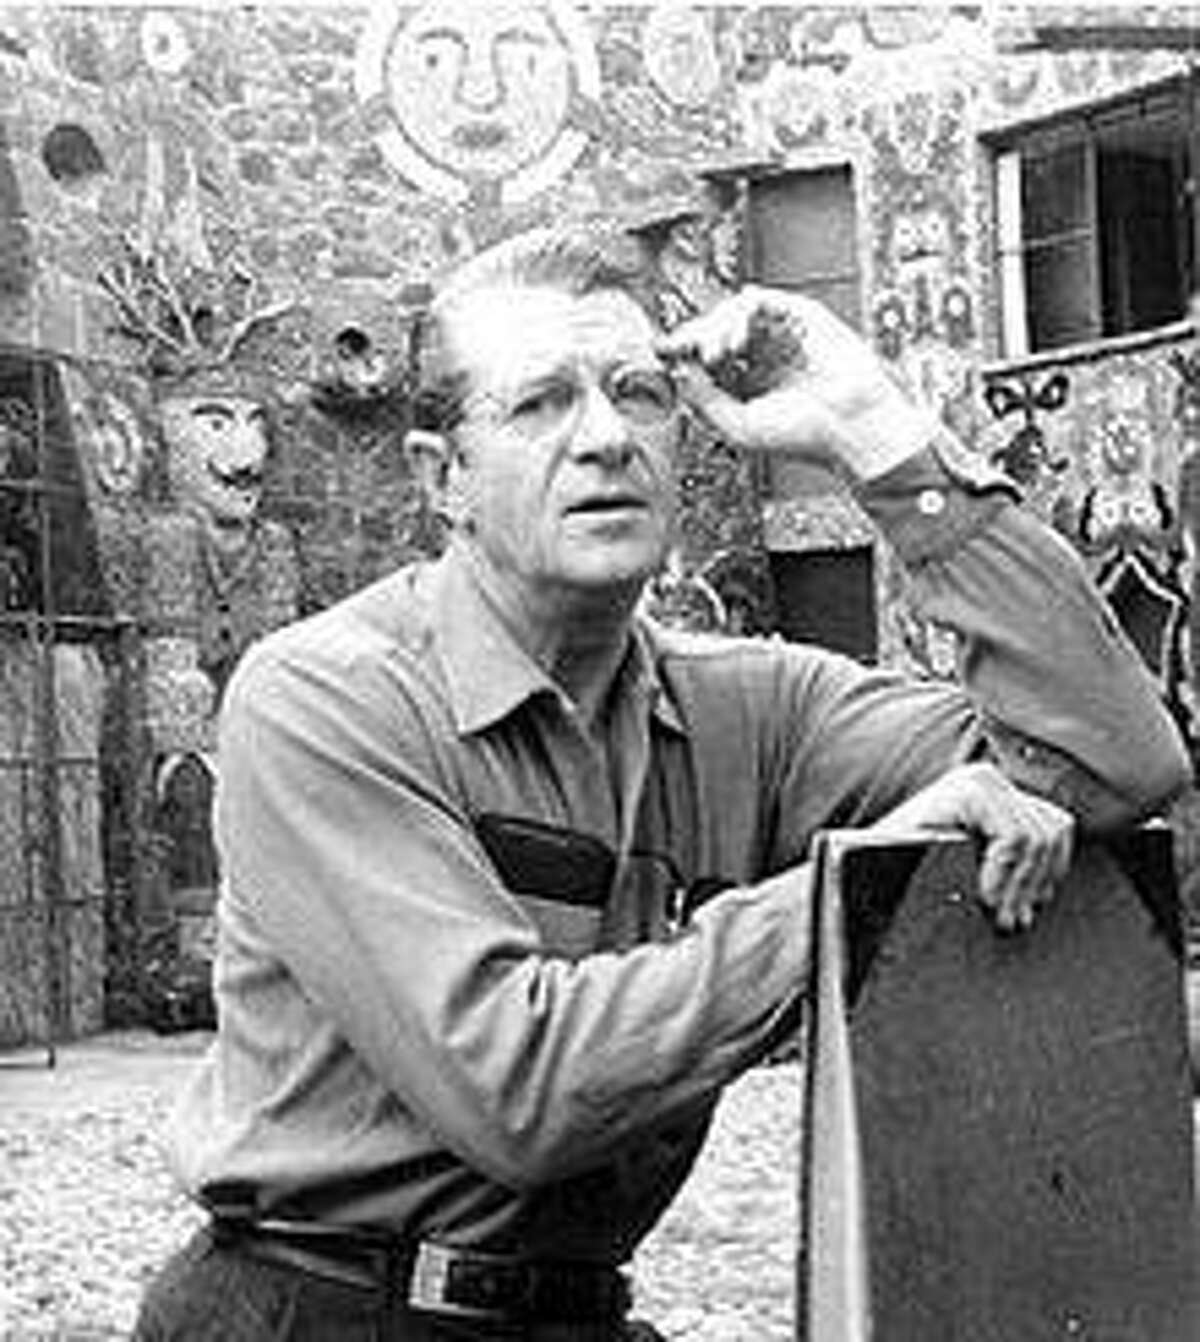 Juan O’Gorman, who died in 1982, was a revolutionary Mexican artist and architect.